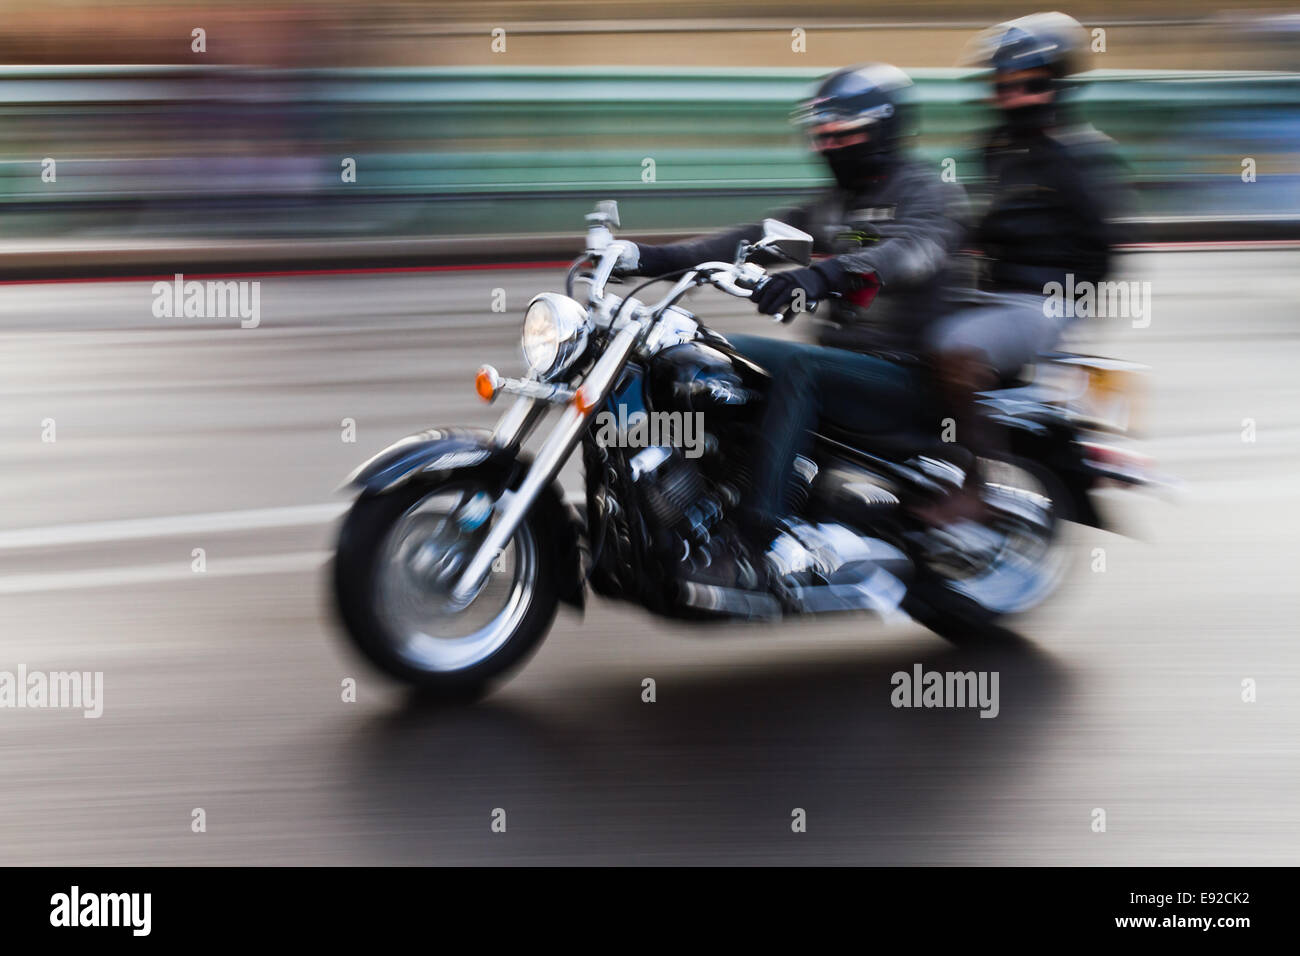 motorcycle in motion blur Stock Photo